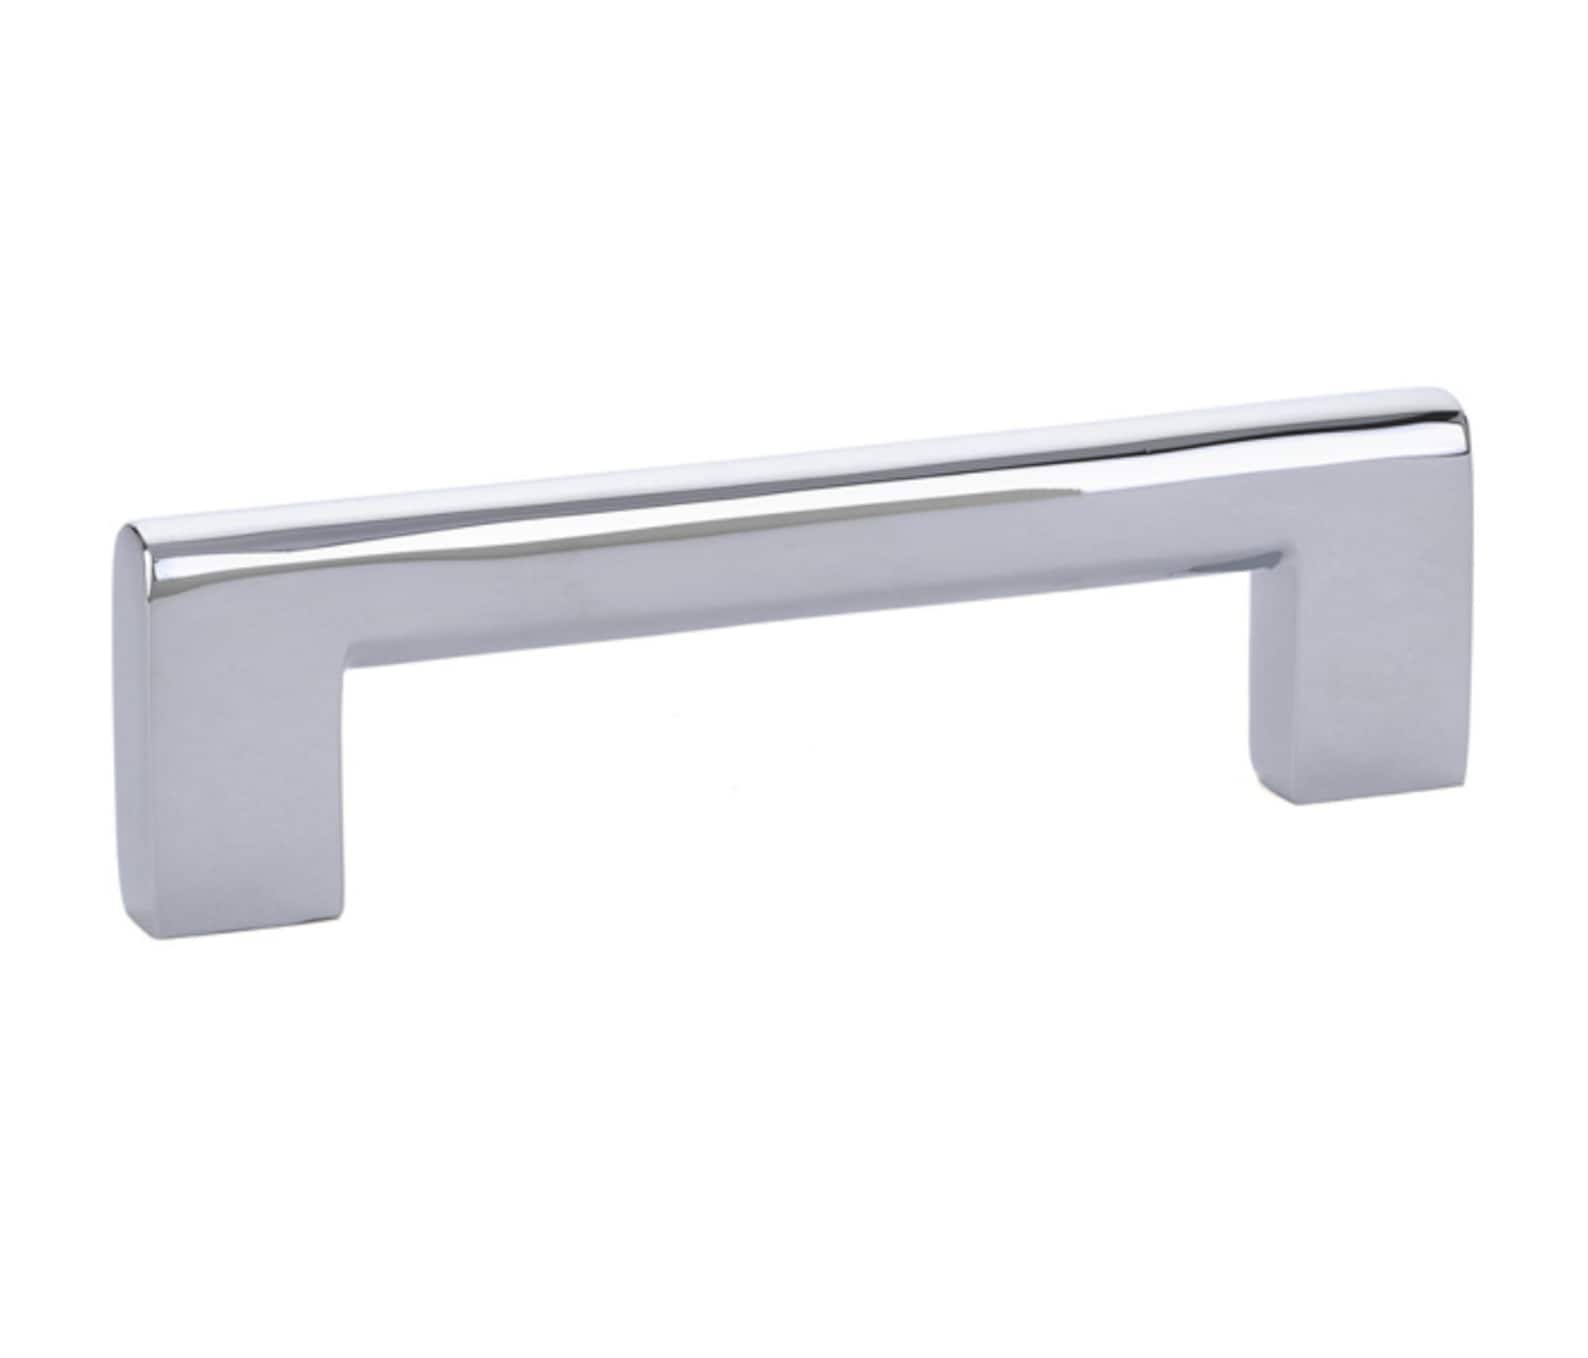 Luxe Drawer Pulls and Cabinet Knobs in Polished Chrome - Forge Hardware Studio